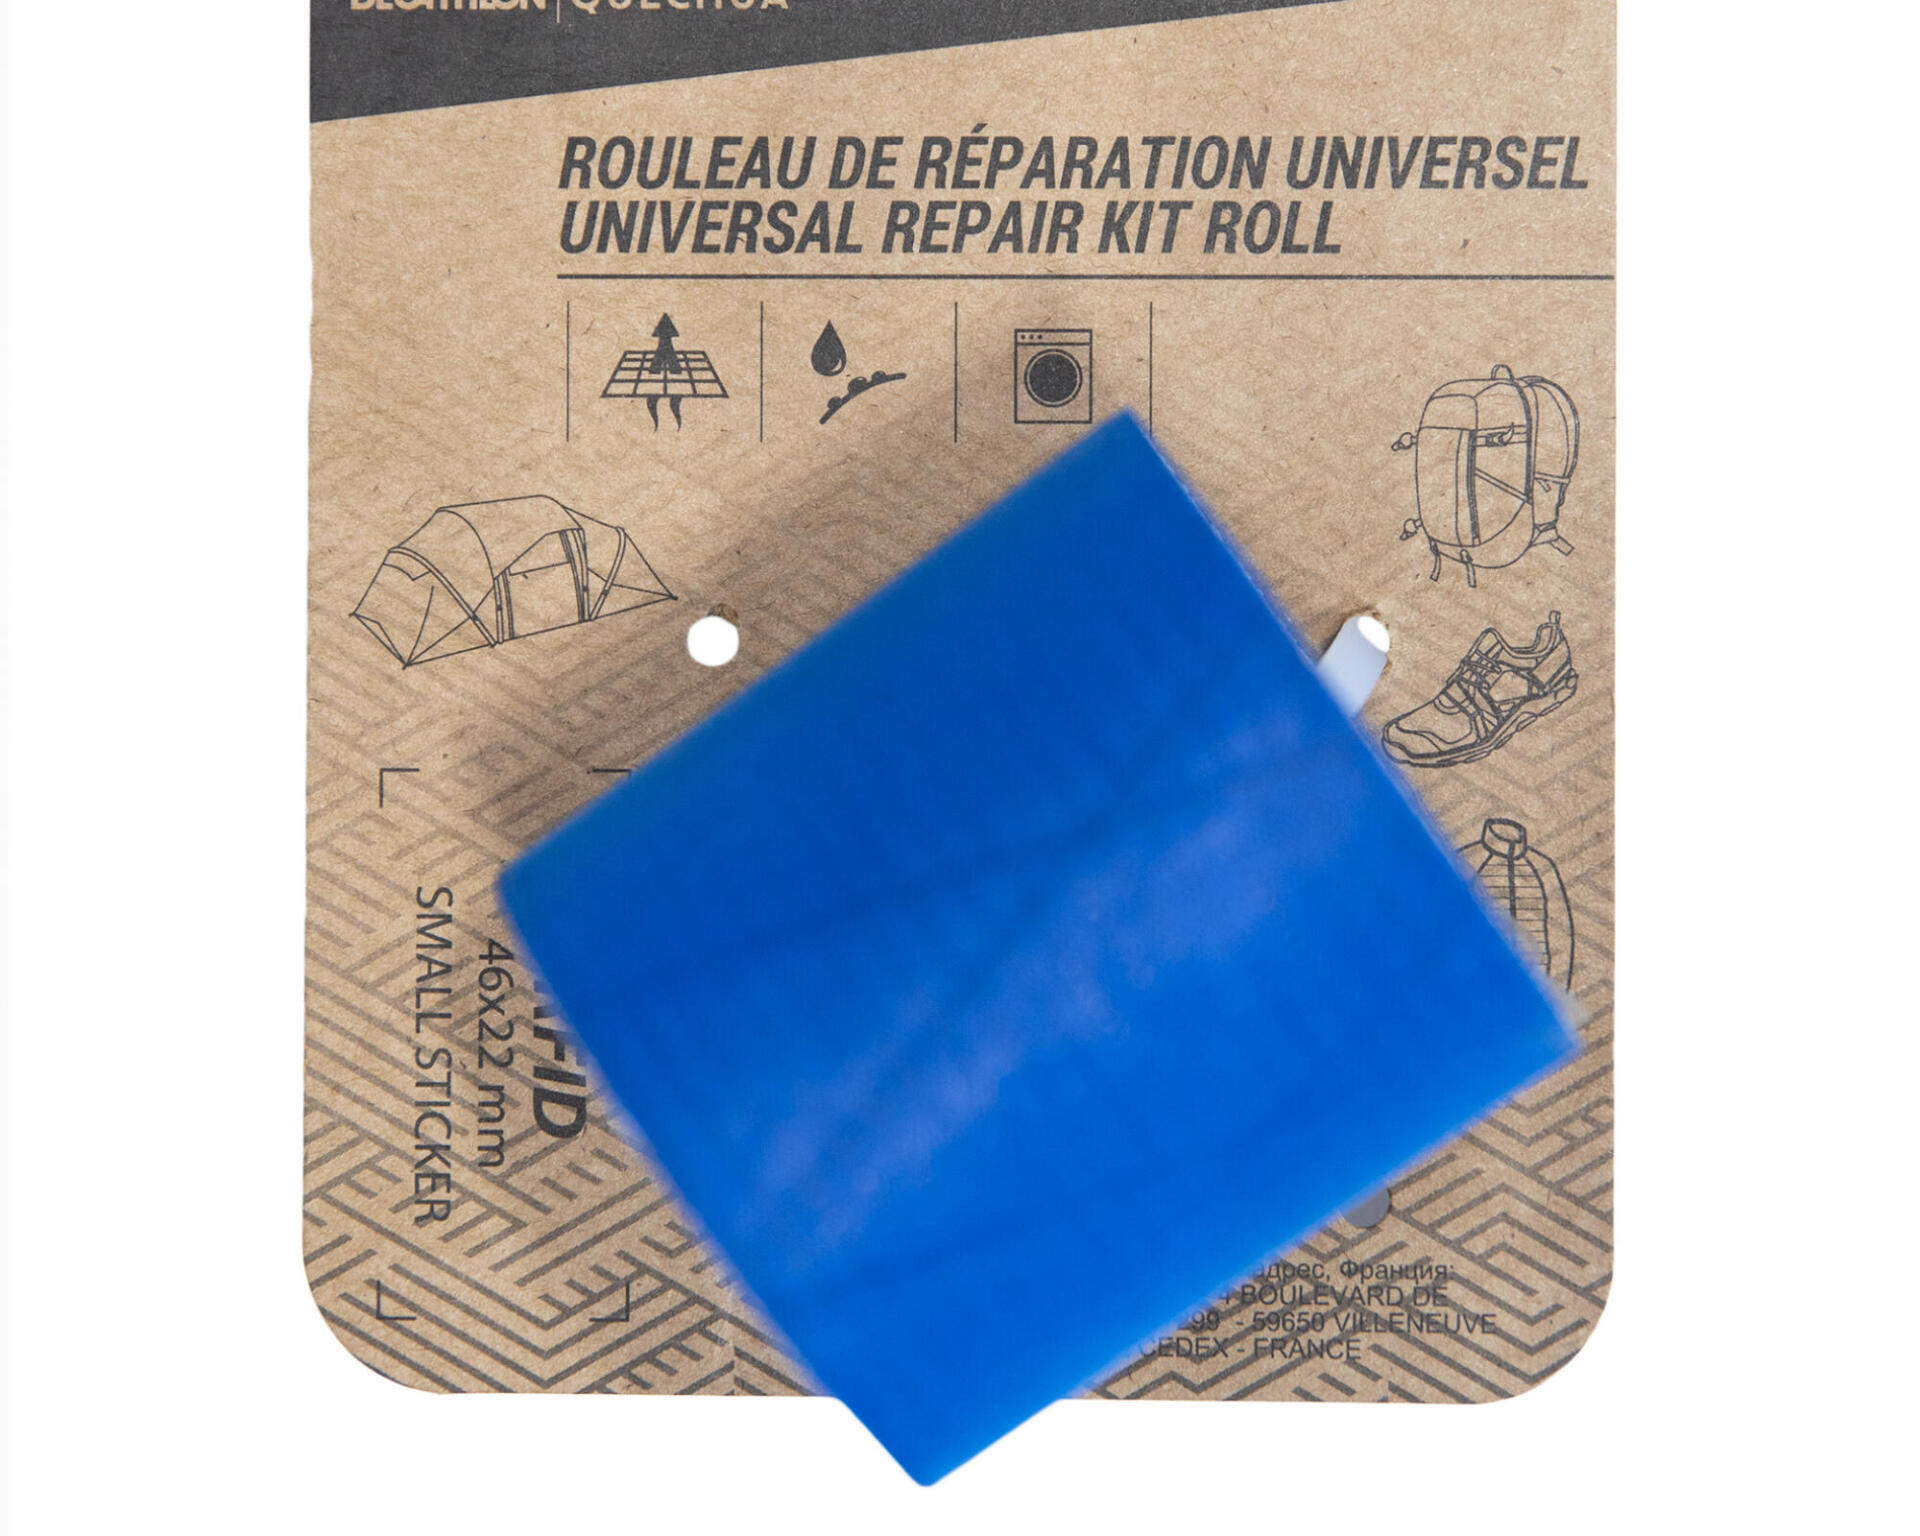 Adhesive repair roll for your Forclaz MT100 trekking bag